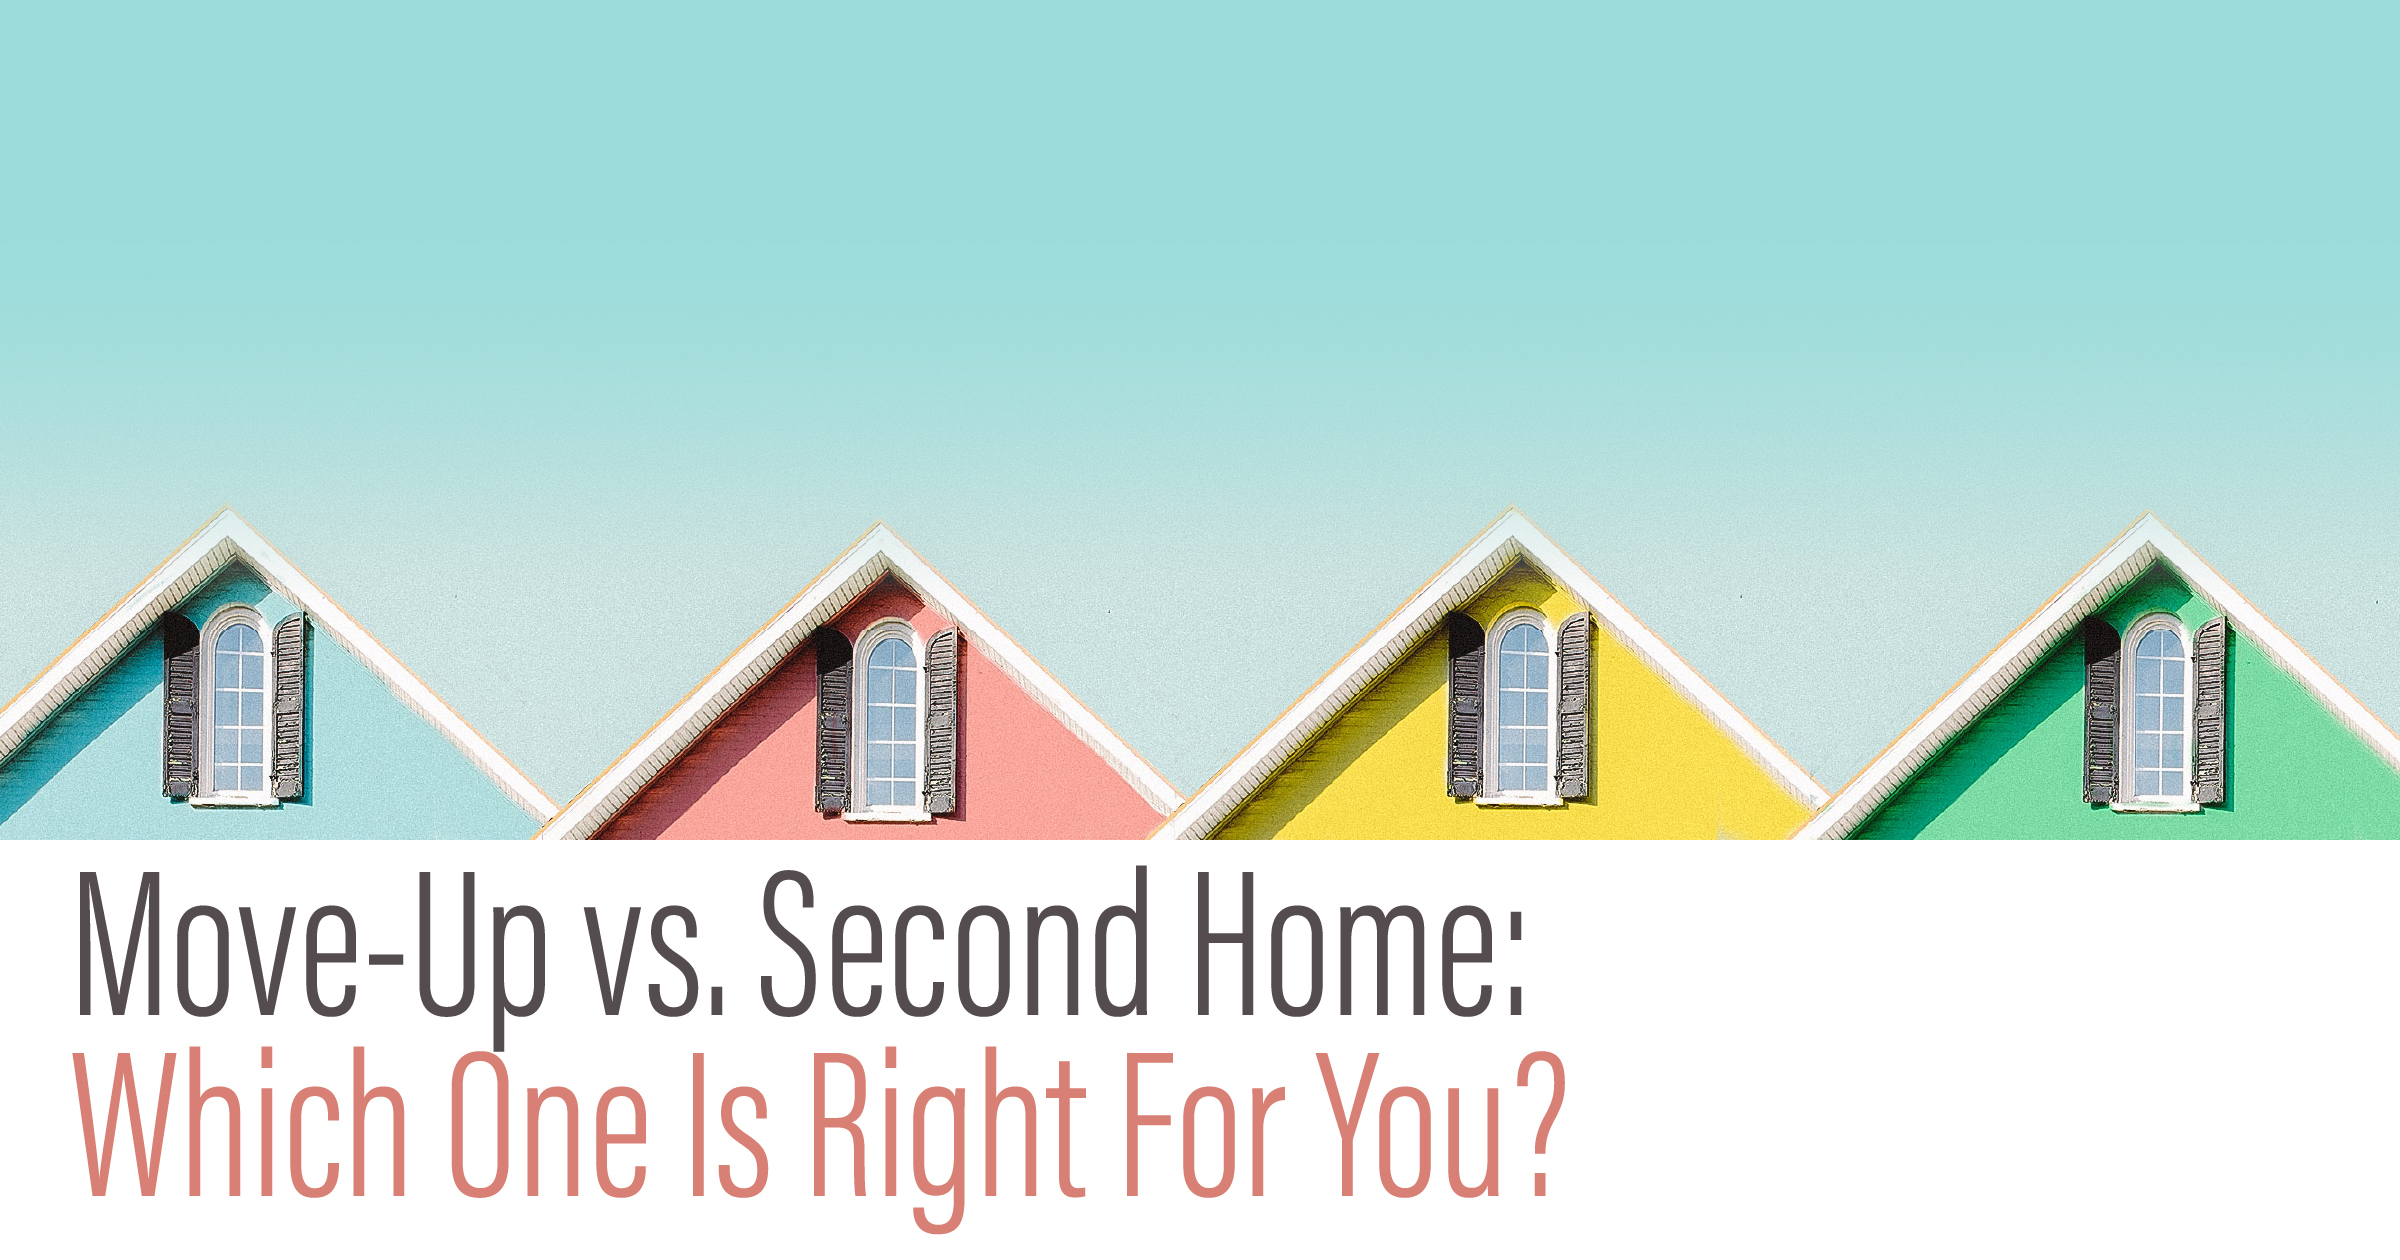 Move-up vs Second Home